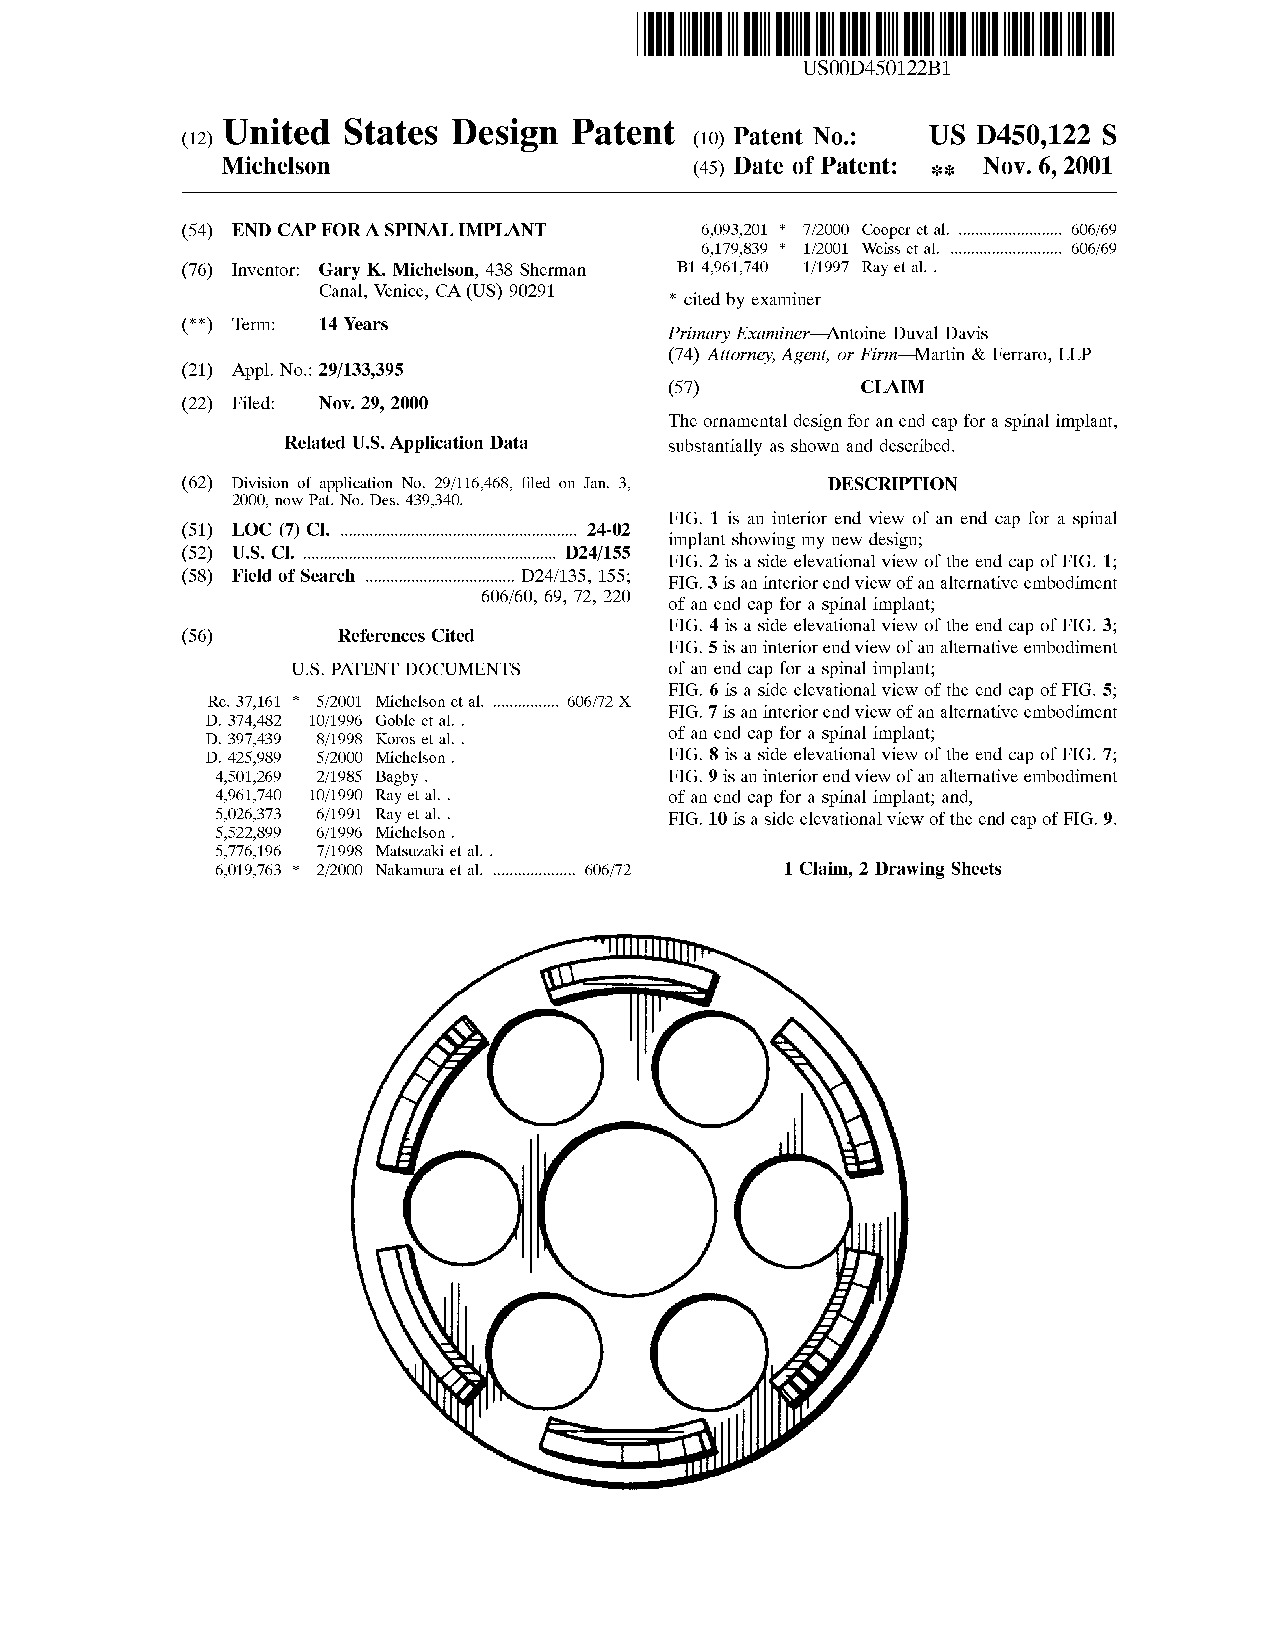 End cap for a spinal implant - Patent D450,122